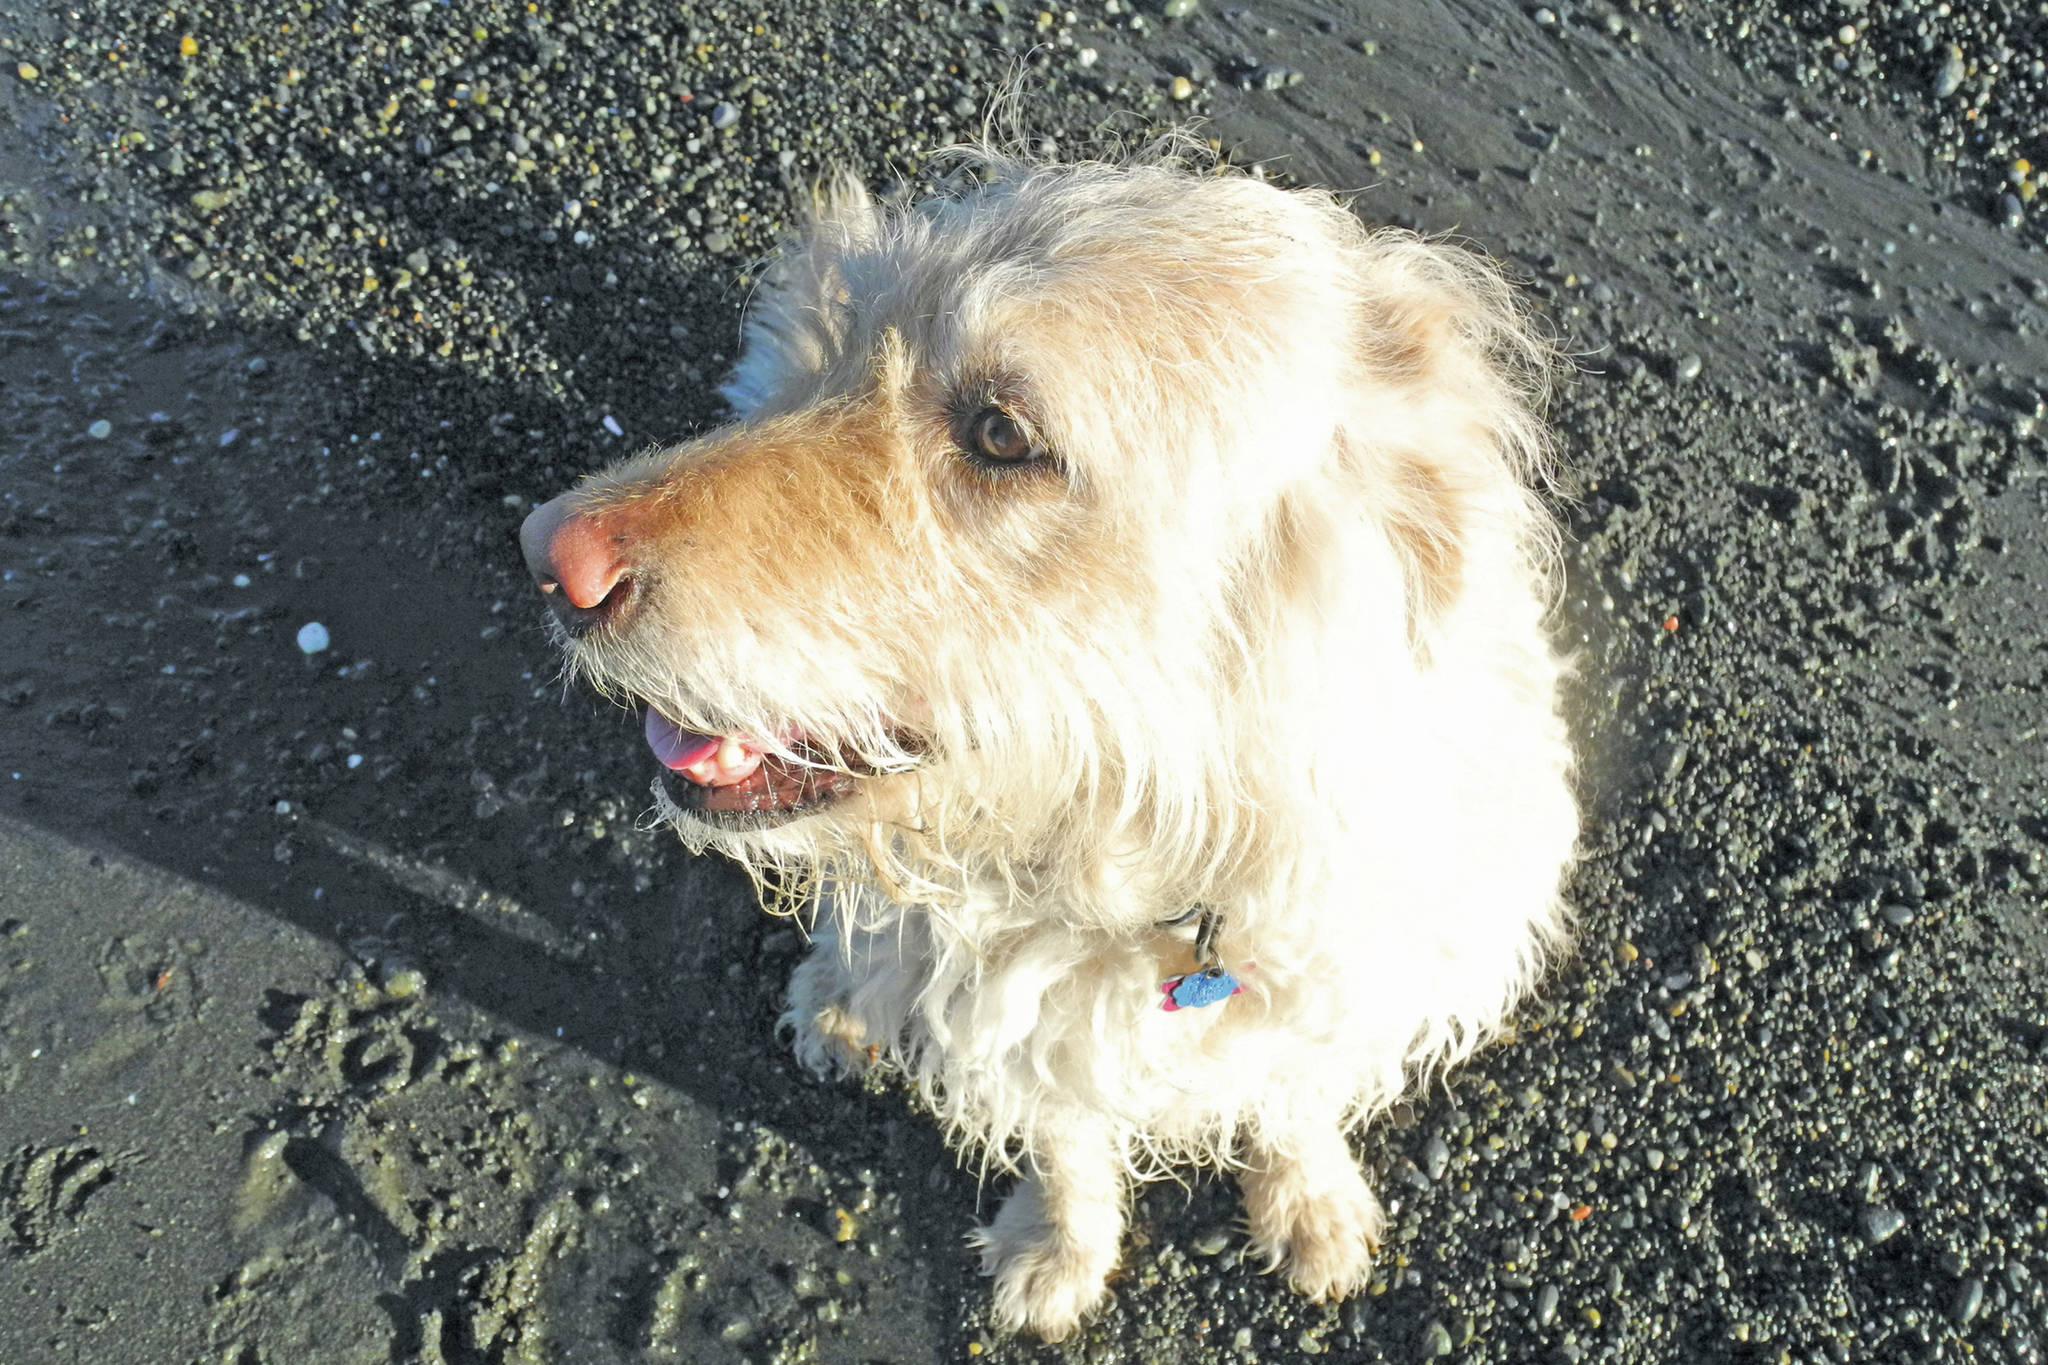 Michael Armstrong’s dog, Leia, waits patiently to go for a walk on the Homer Spit beach on Jan. 25, 2014, in Homer, Alaska. (Photo by Michael Armstrong/Homer News)